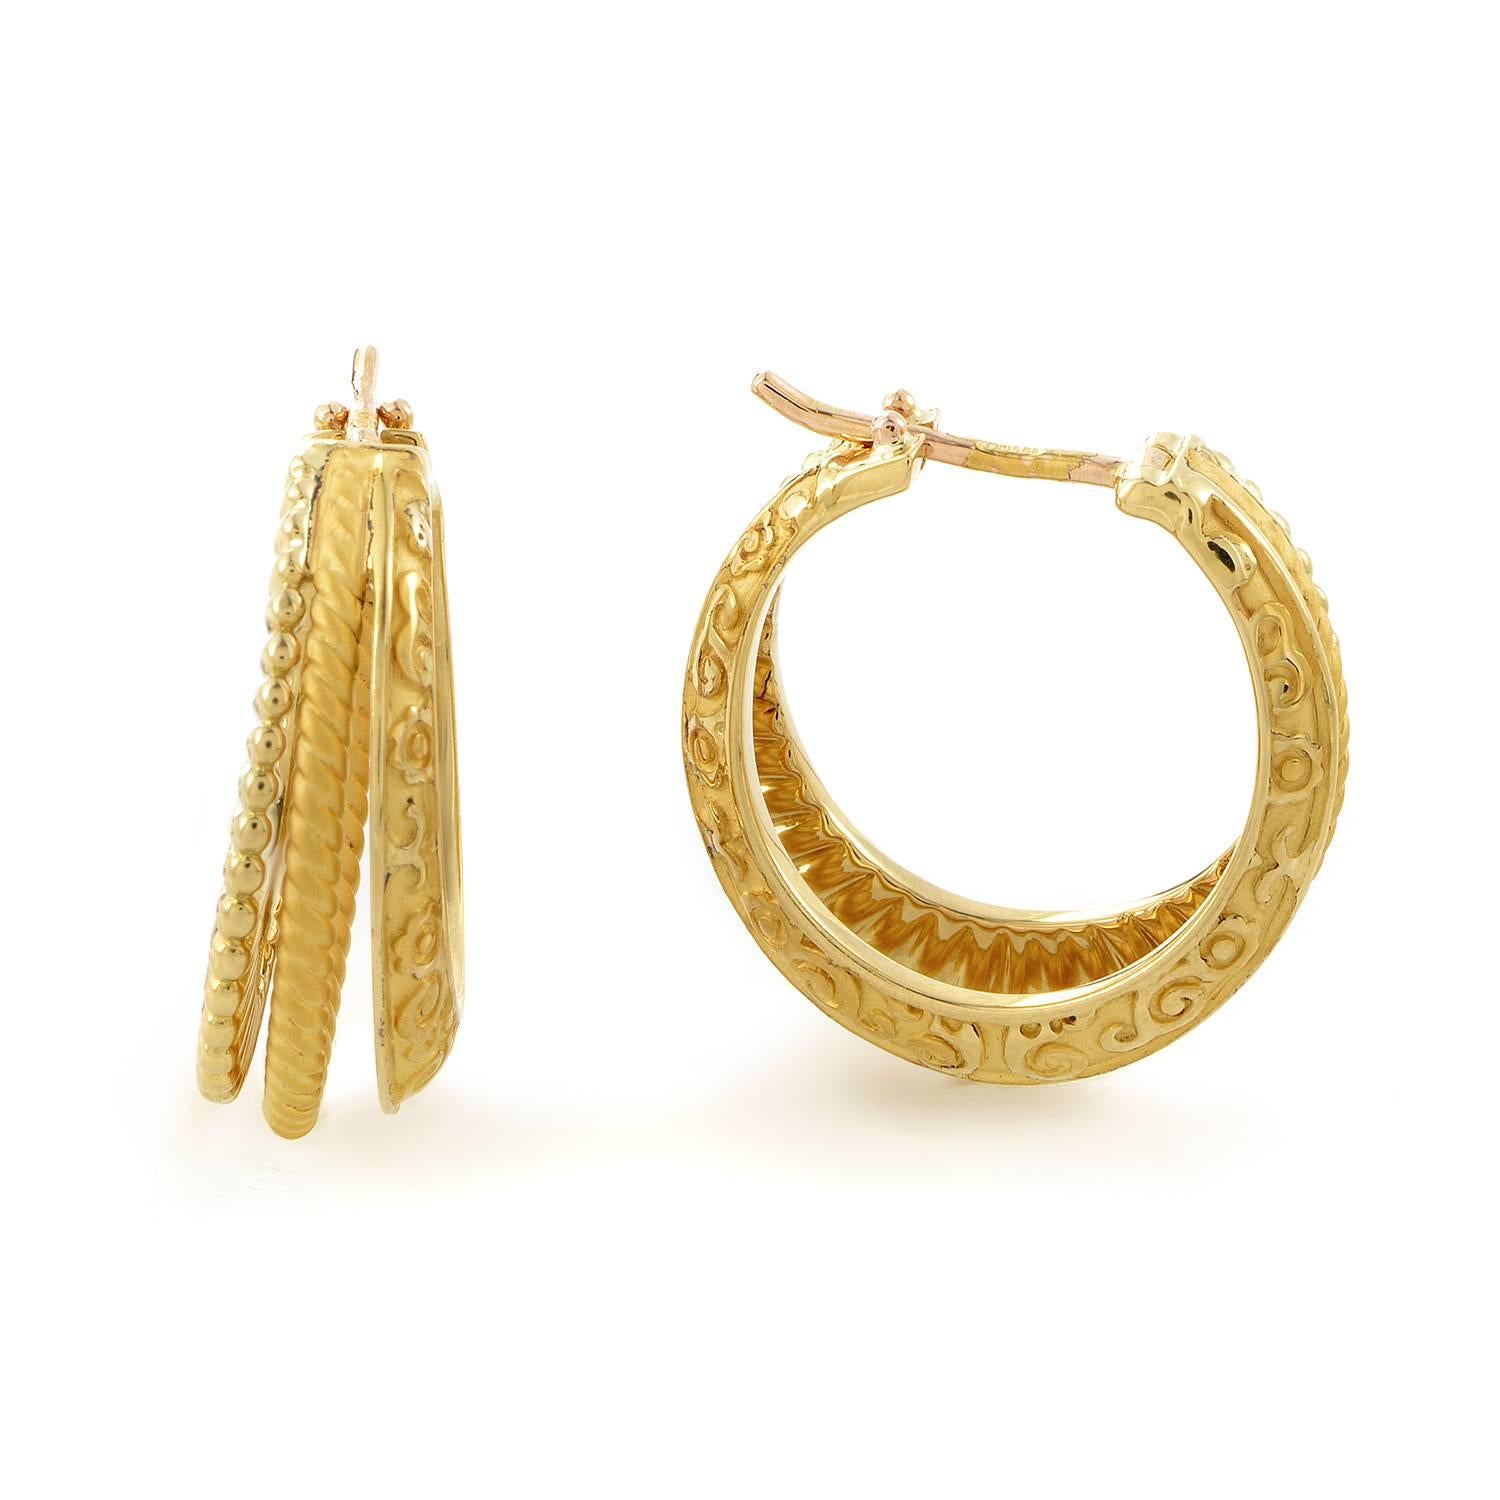 Carrera y Carrera triple their efforts with this intriguing earring design. In each earring the 18K Yellow Gold is given three turns, each one given its own texture and pattern. One perpetuates a beaded spin, the next takes on the ribbed texture of